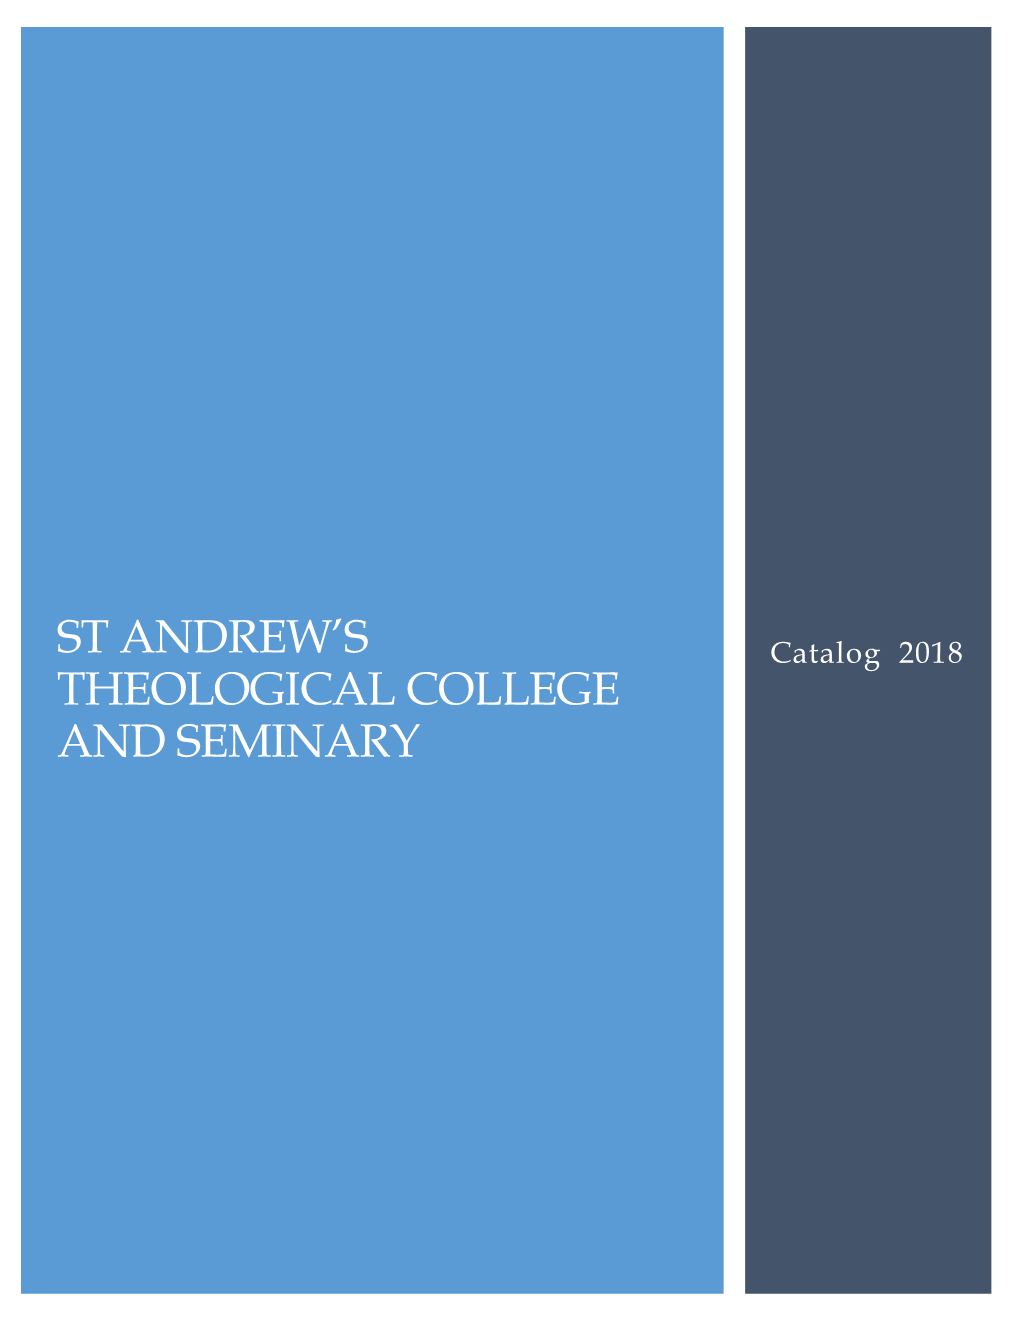 Catalog 2018 THEOLOGICAL COLLEGE and SEMINARY